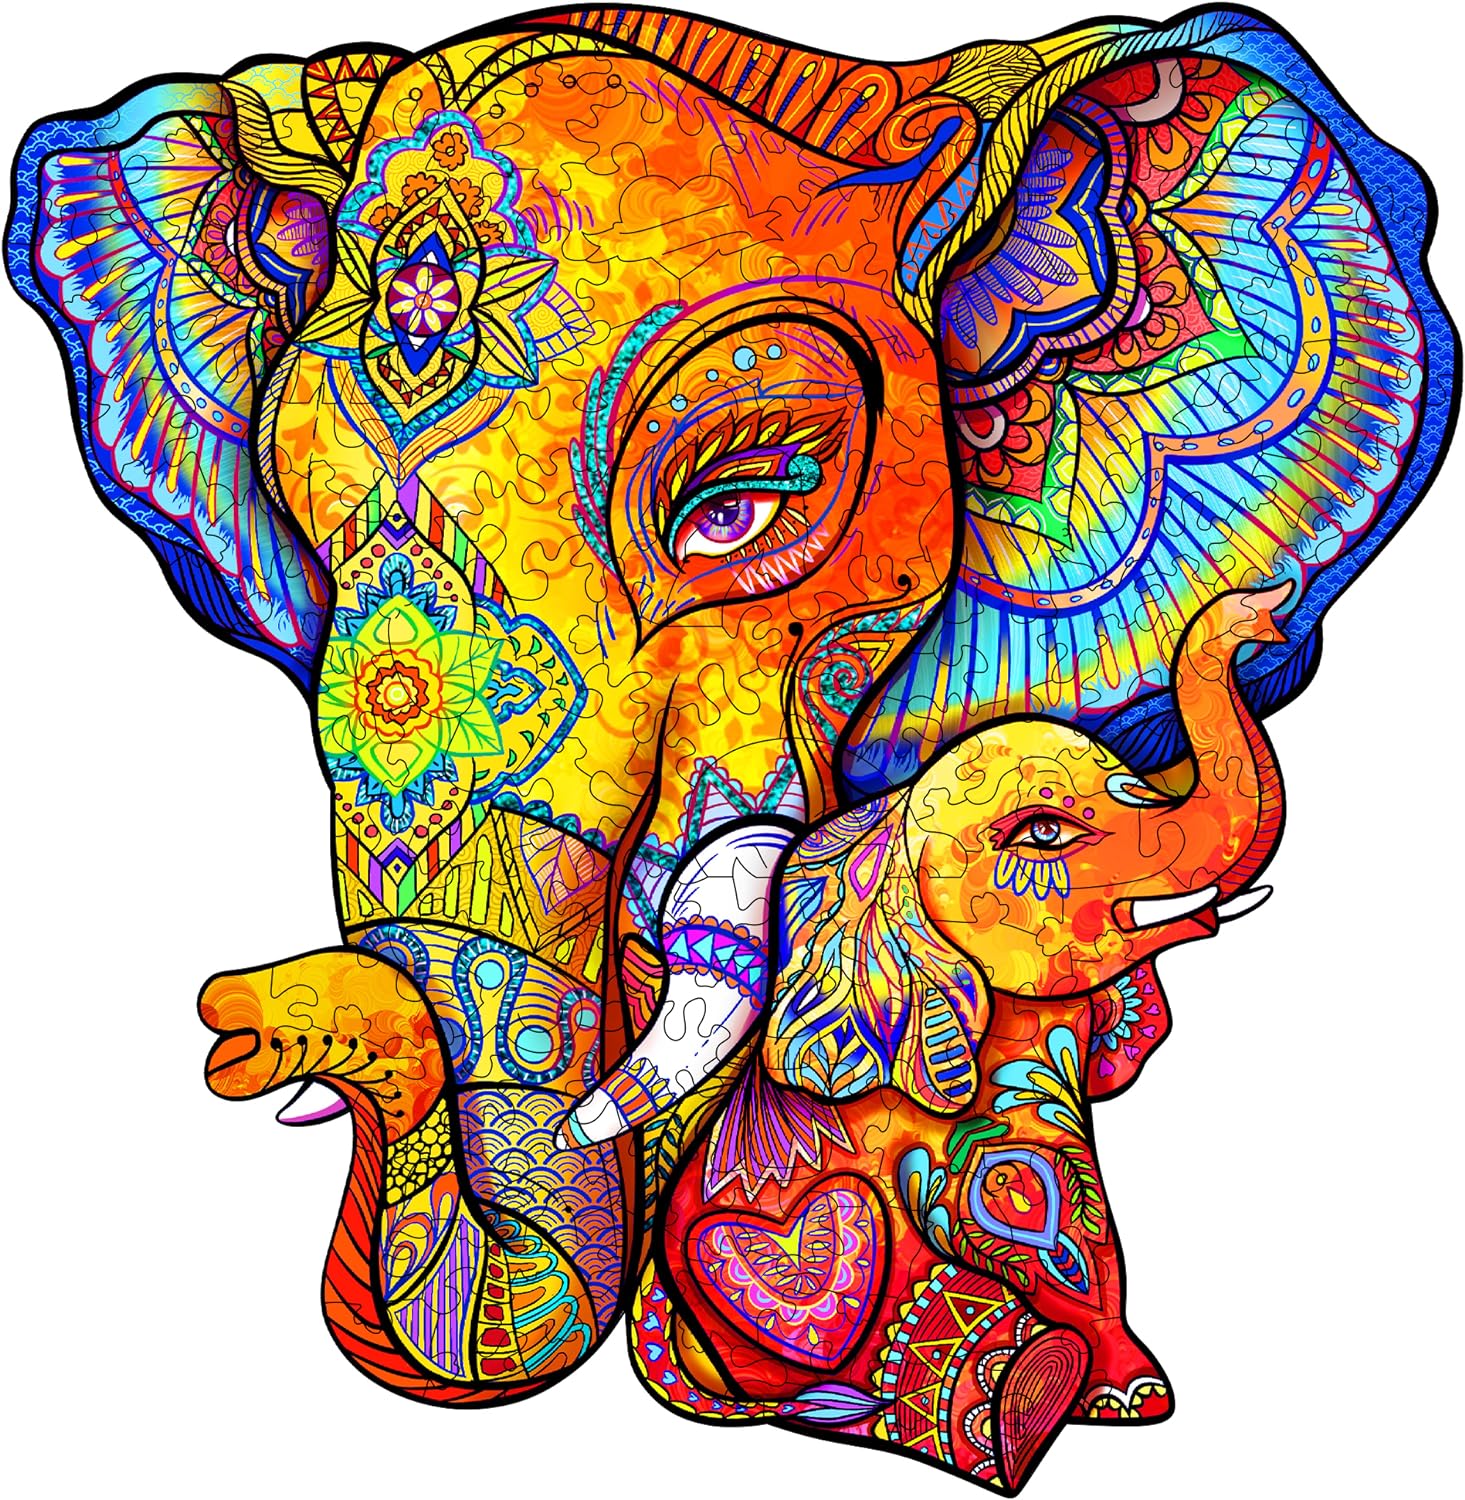 KAAYEE Wooden Jigsaw Puzzles-Wooden Puzzle Adult Unique Shape Advanced Elephant Puzzle Maternal Love Wooden Jigsaw Puzzle for Adult,Best Gift for Adults and Kids,Family Puzzles (L-12.8X12.4in-240pcs)